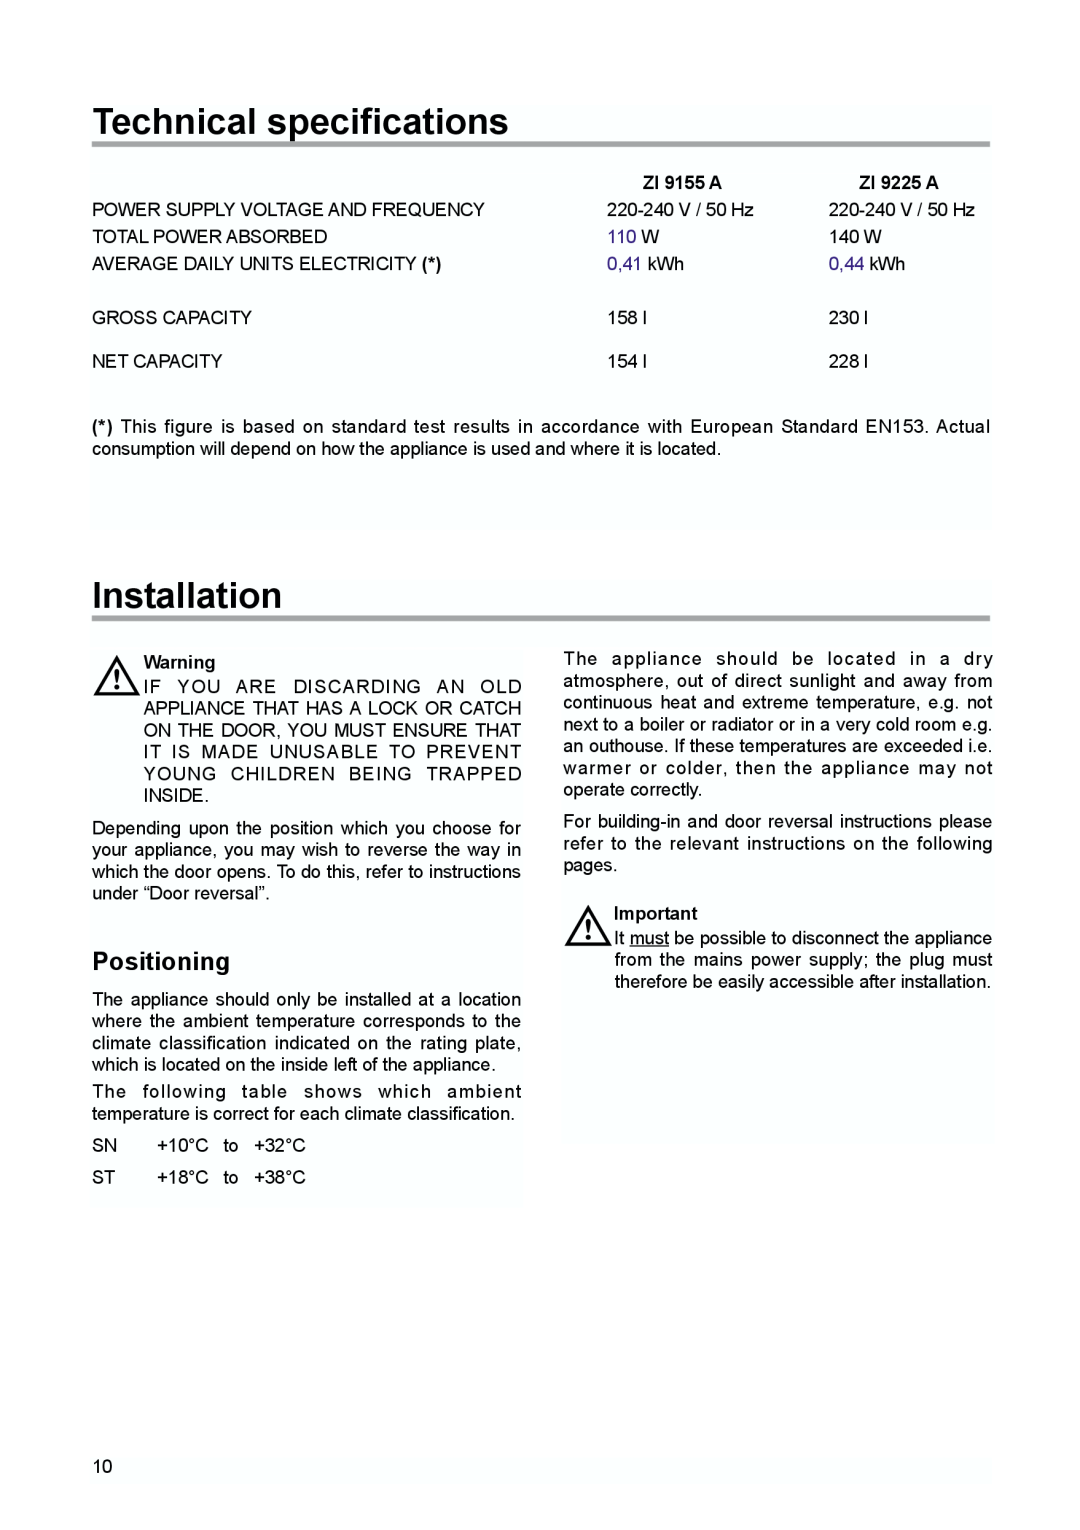 Zanussi ZI 9155 A, 338, Refrigerator manual Technical specifications, Installation, Positioning, 110 W, 0,41 kWh, 0,44 kWh 